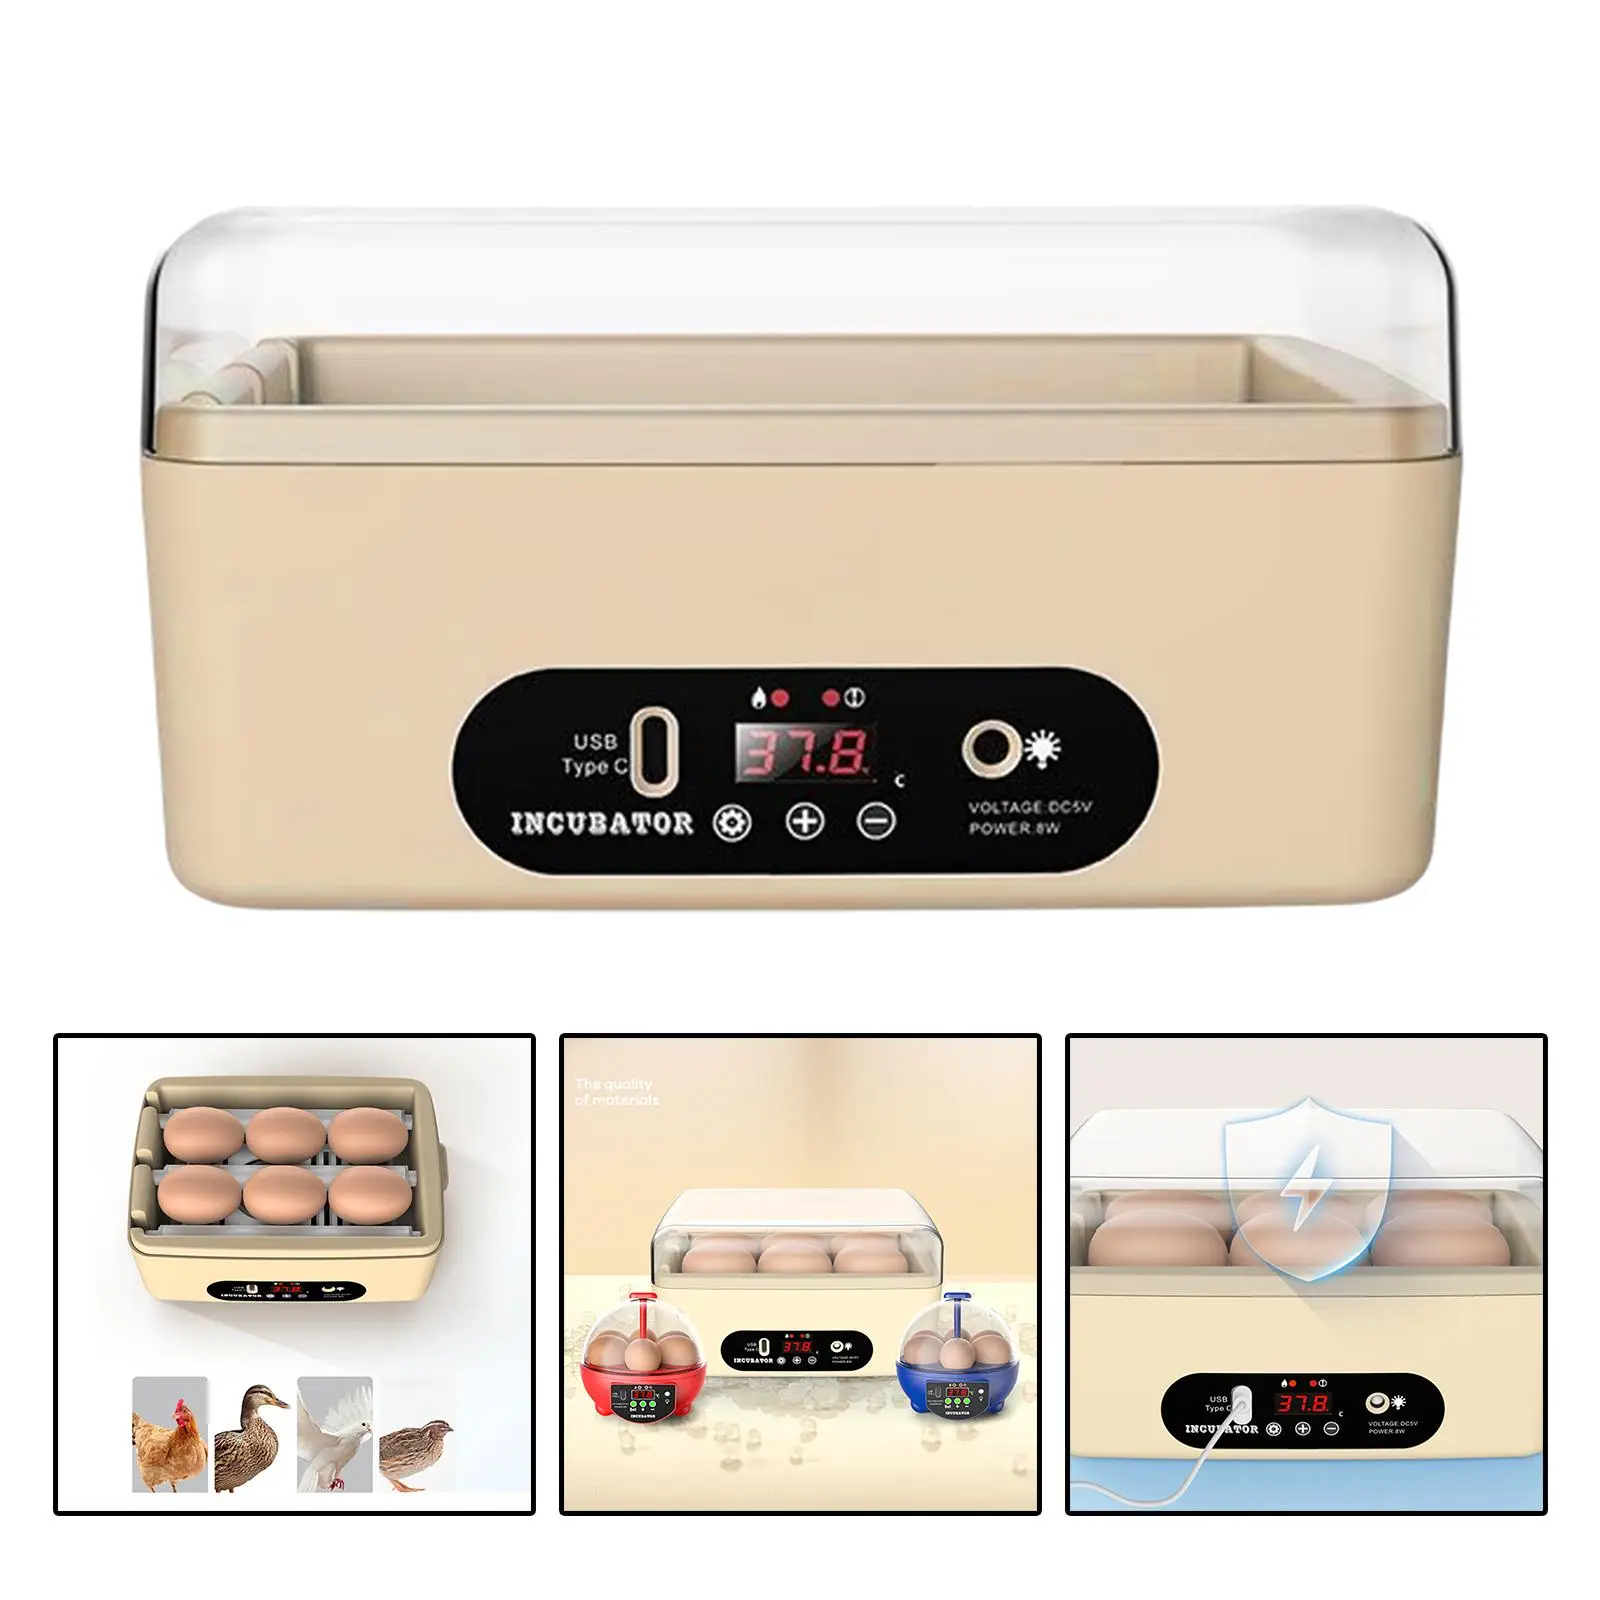 6 Eggs Incubator Automati Egg Candler Egg Turner Hatching Temperature Control Egg Hatcher Chicken Hatcher for Pigeon Duck Quail